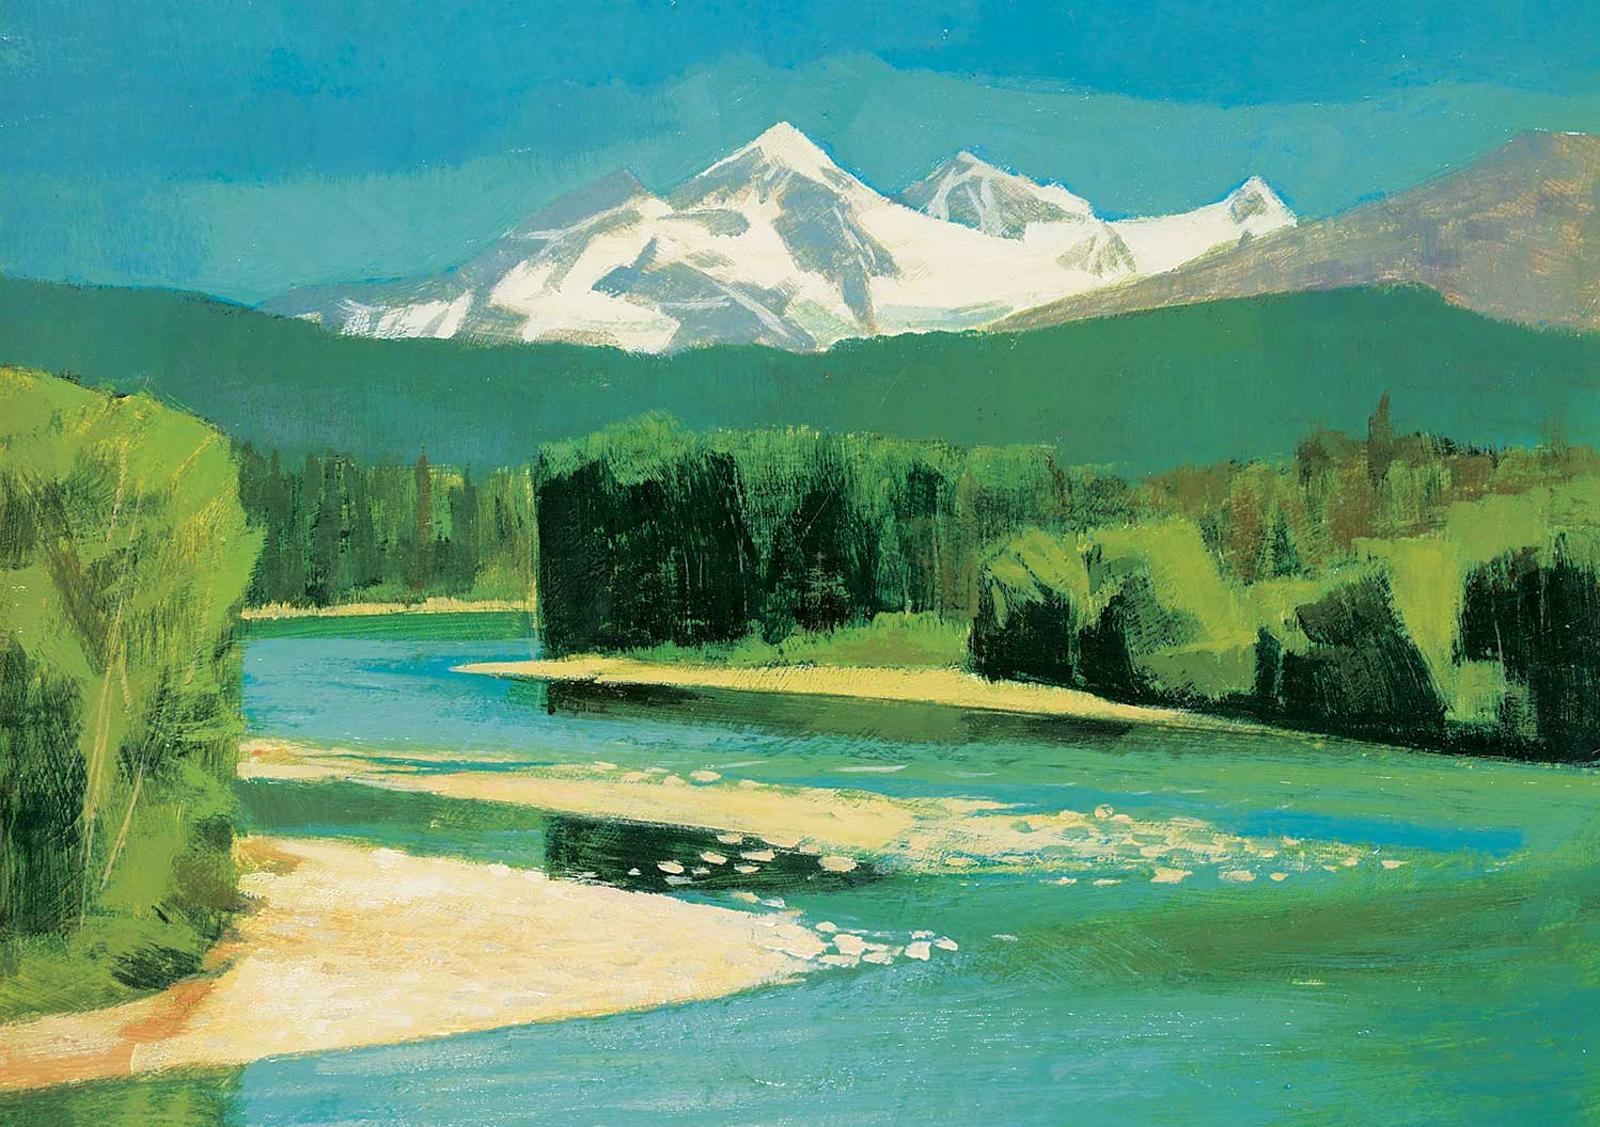 Alan Caswell Collier (1911-1990) - Seven Sisters Mt., Skeena River, B. C.